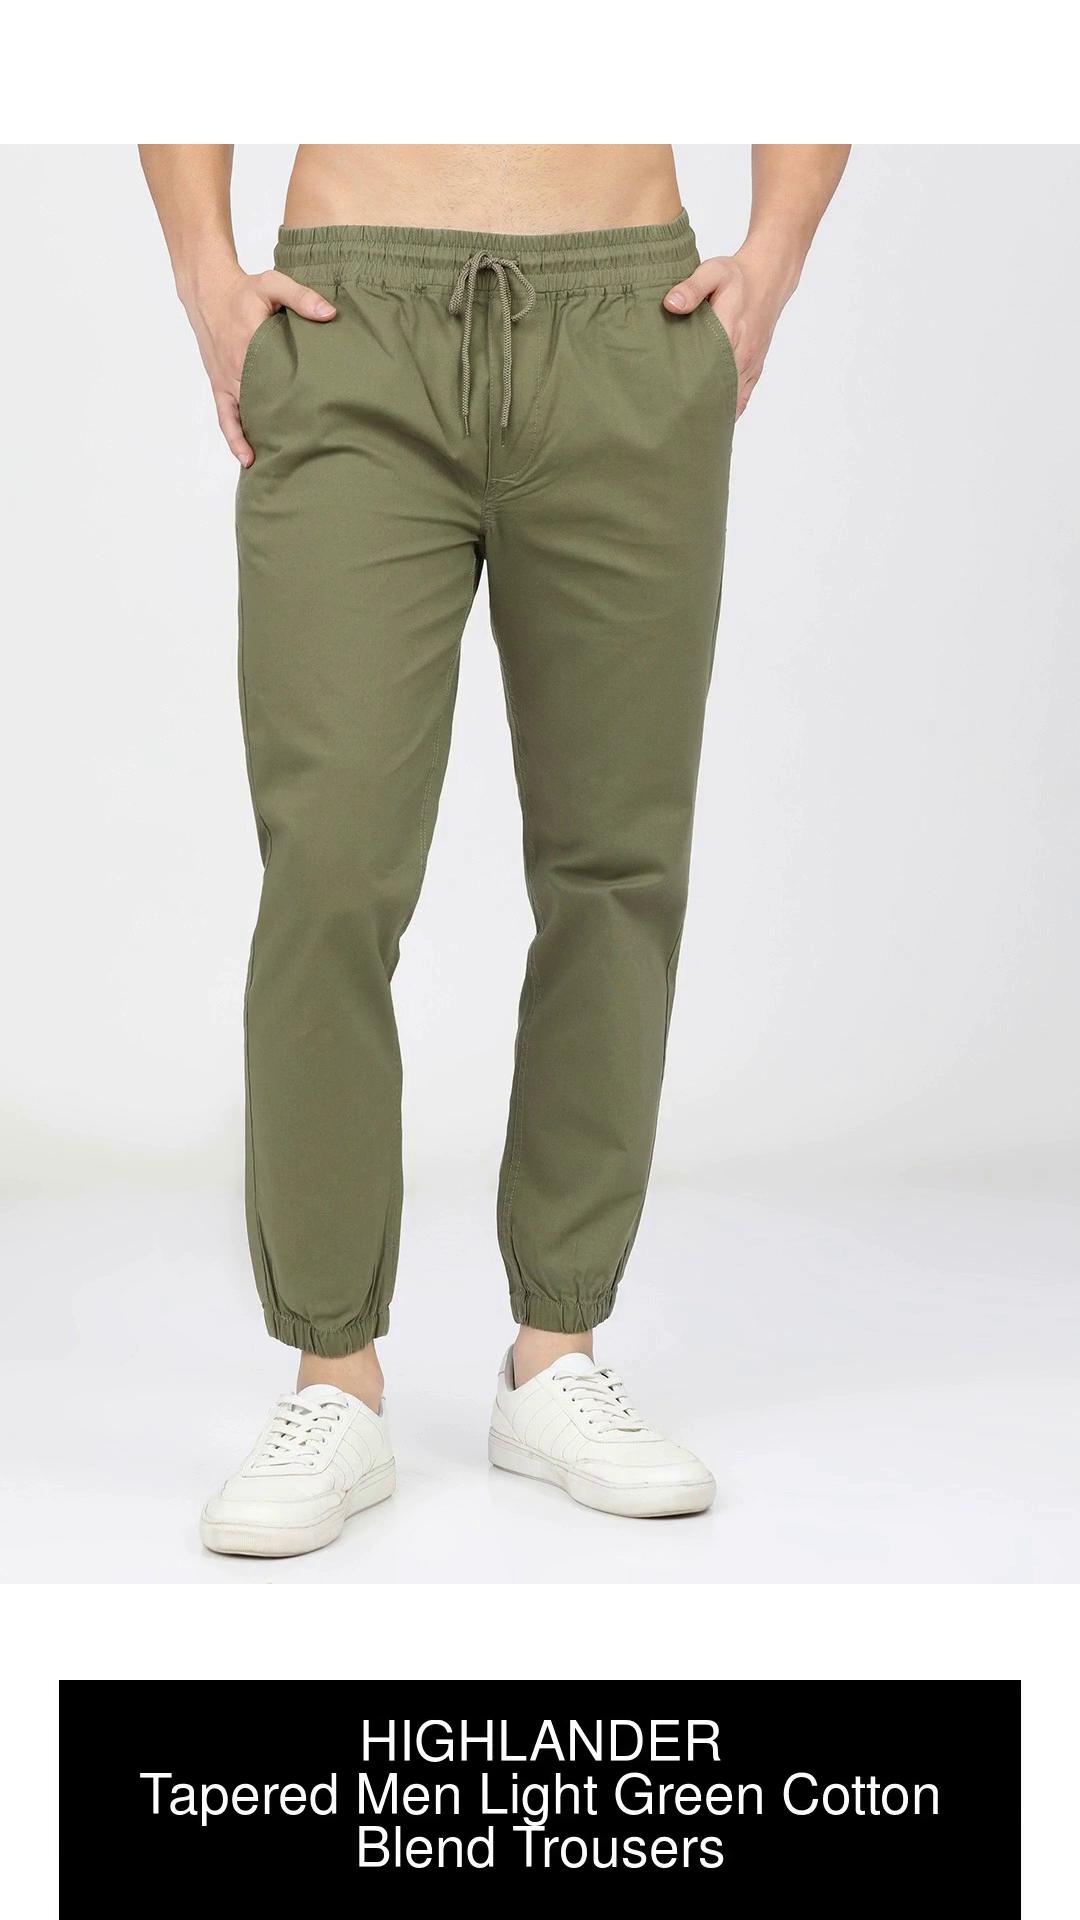 HIGHLANDER Slim Fit Men Green Trousers - Buy LIGHT OLIVE HIGHLANDER Slim  Fit Men Green Trousers Online at Best Prices in India